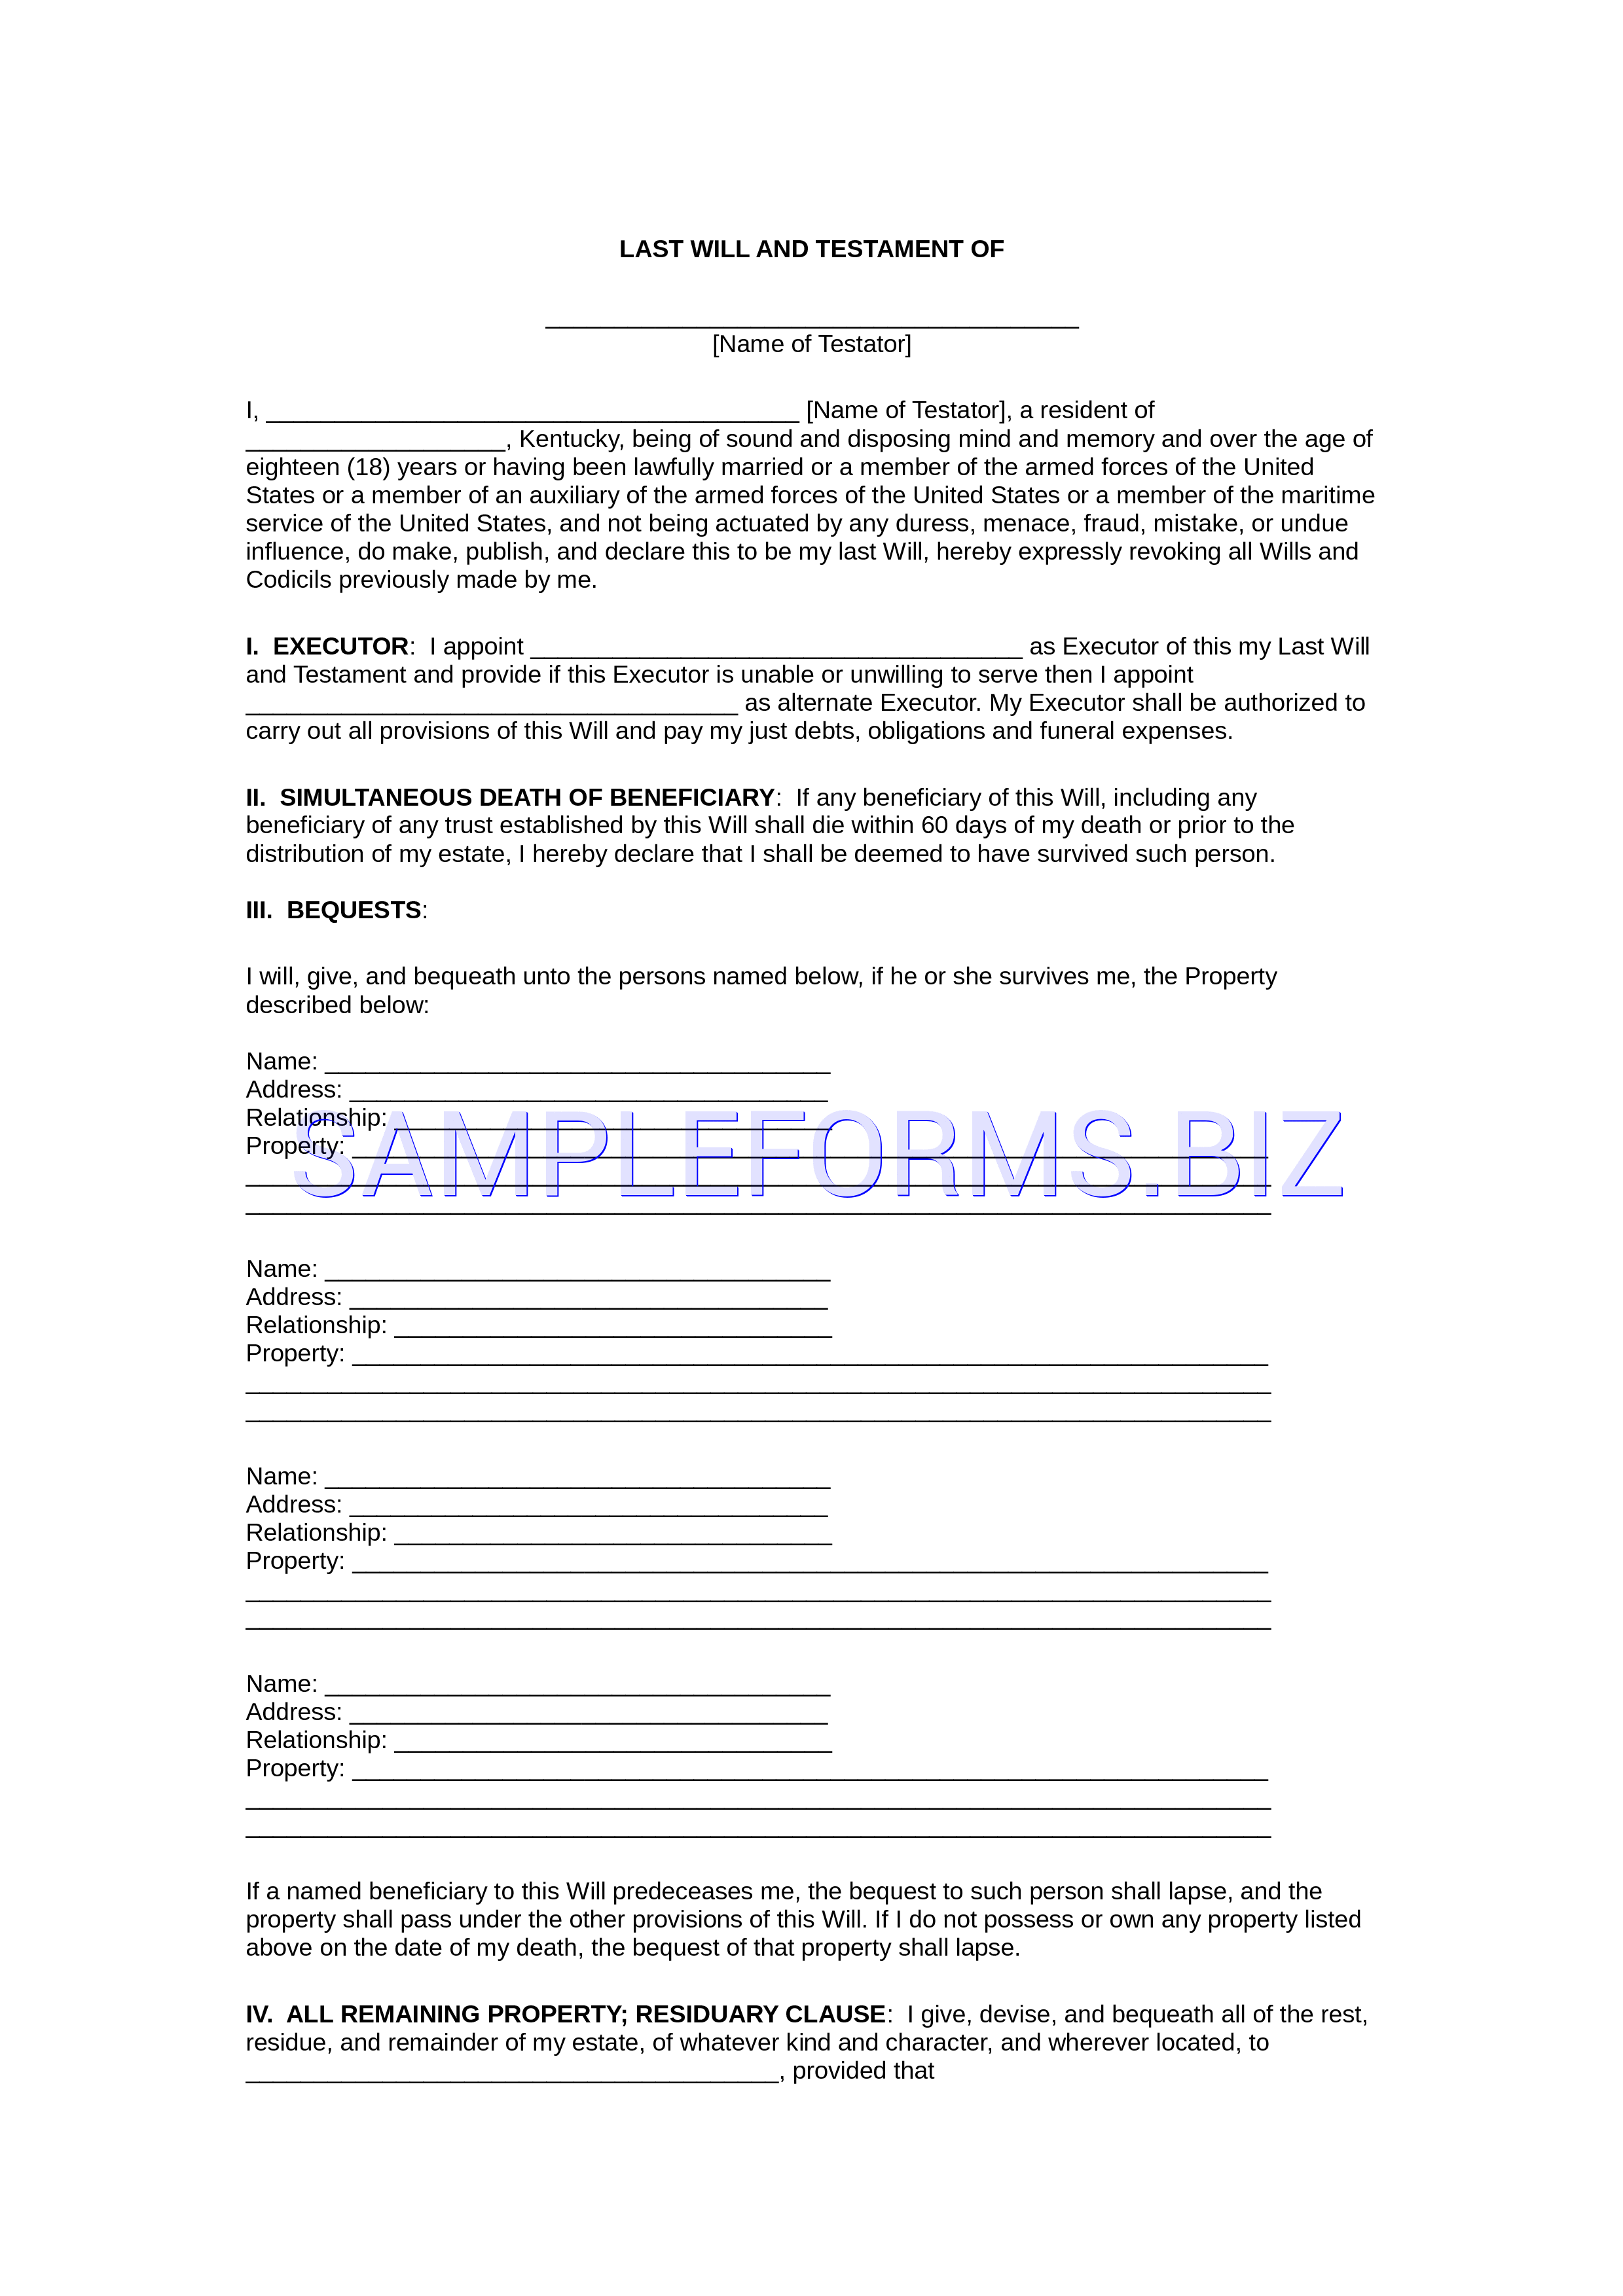 Preview free downloadable Kentucky Last Will and Testament Form in PDF (page 1)